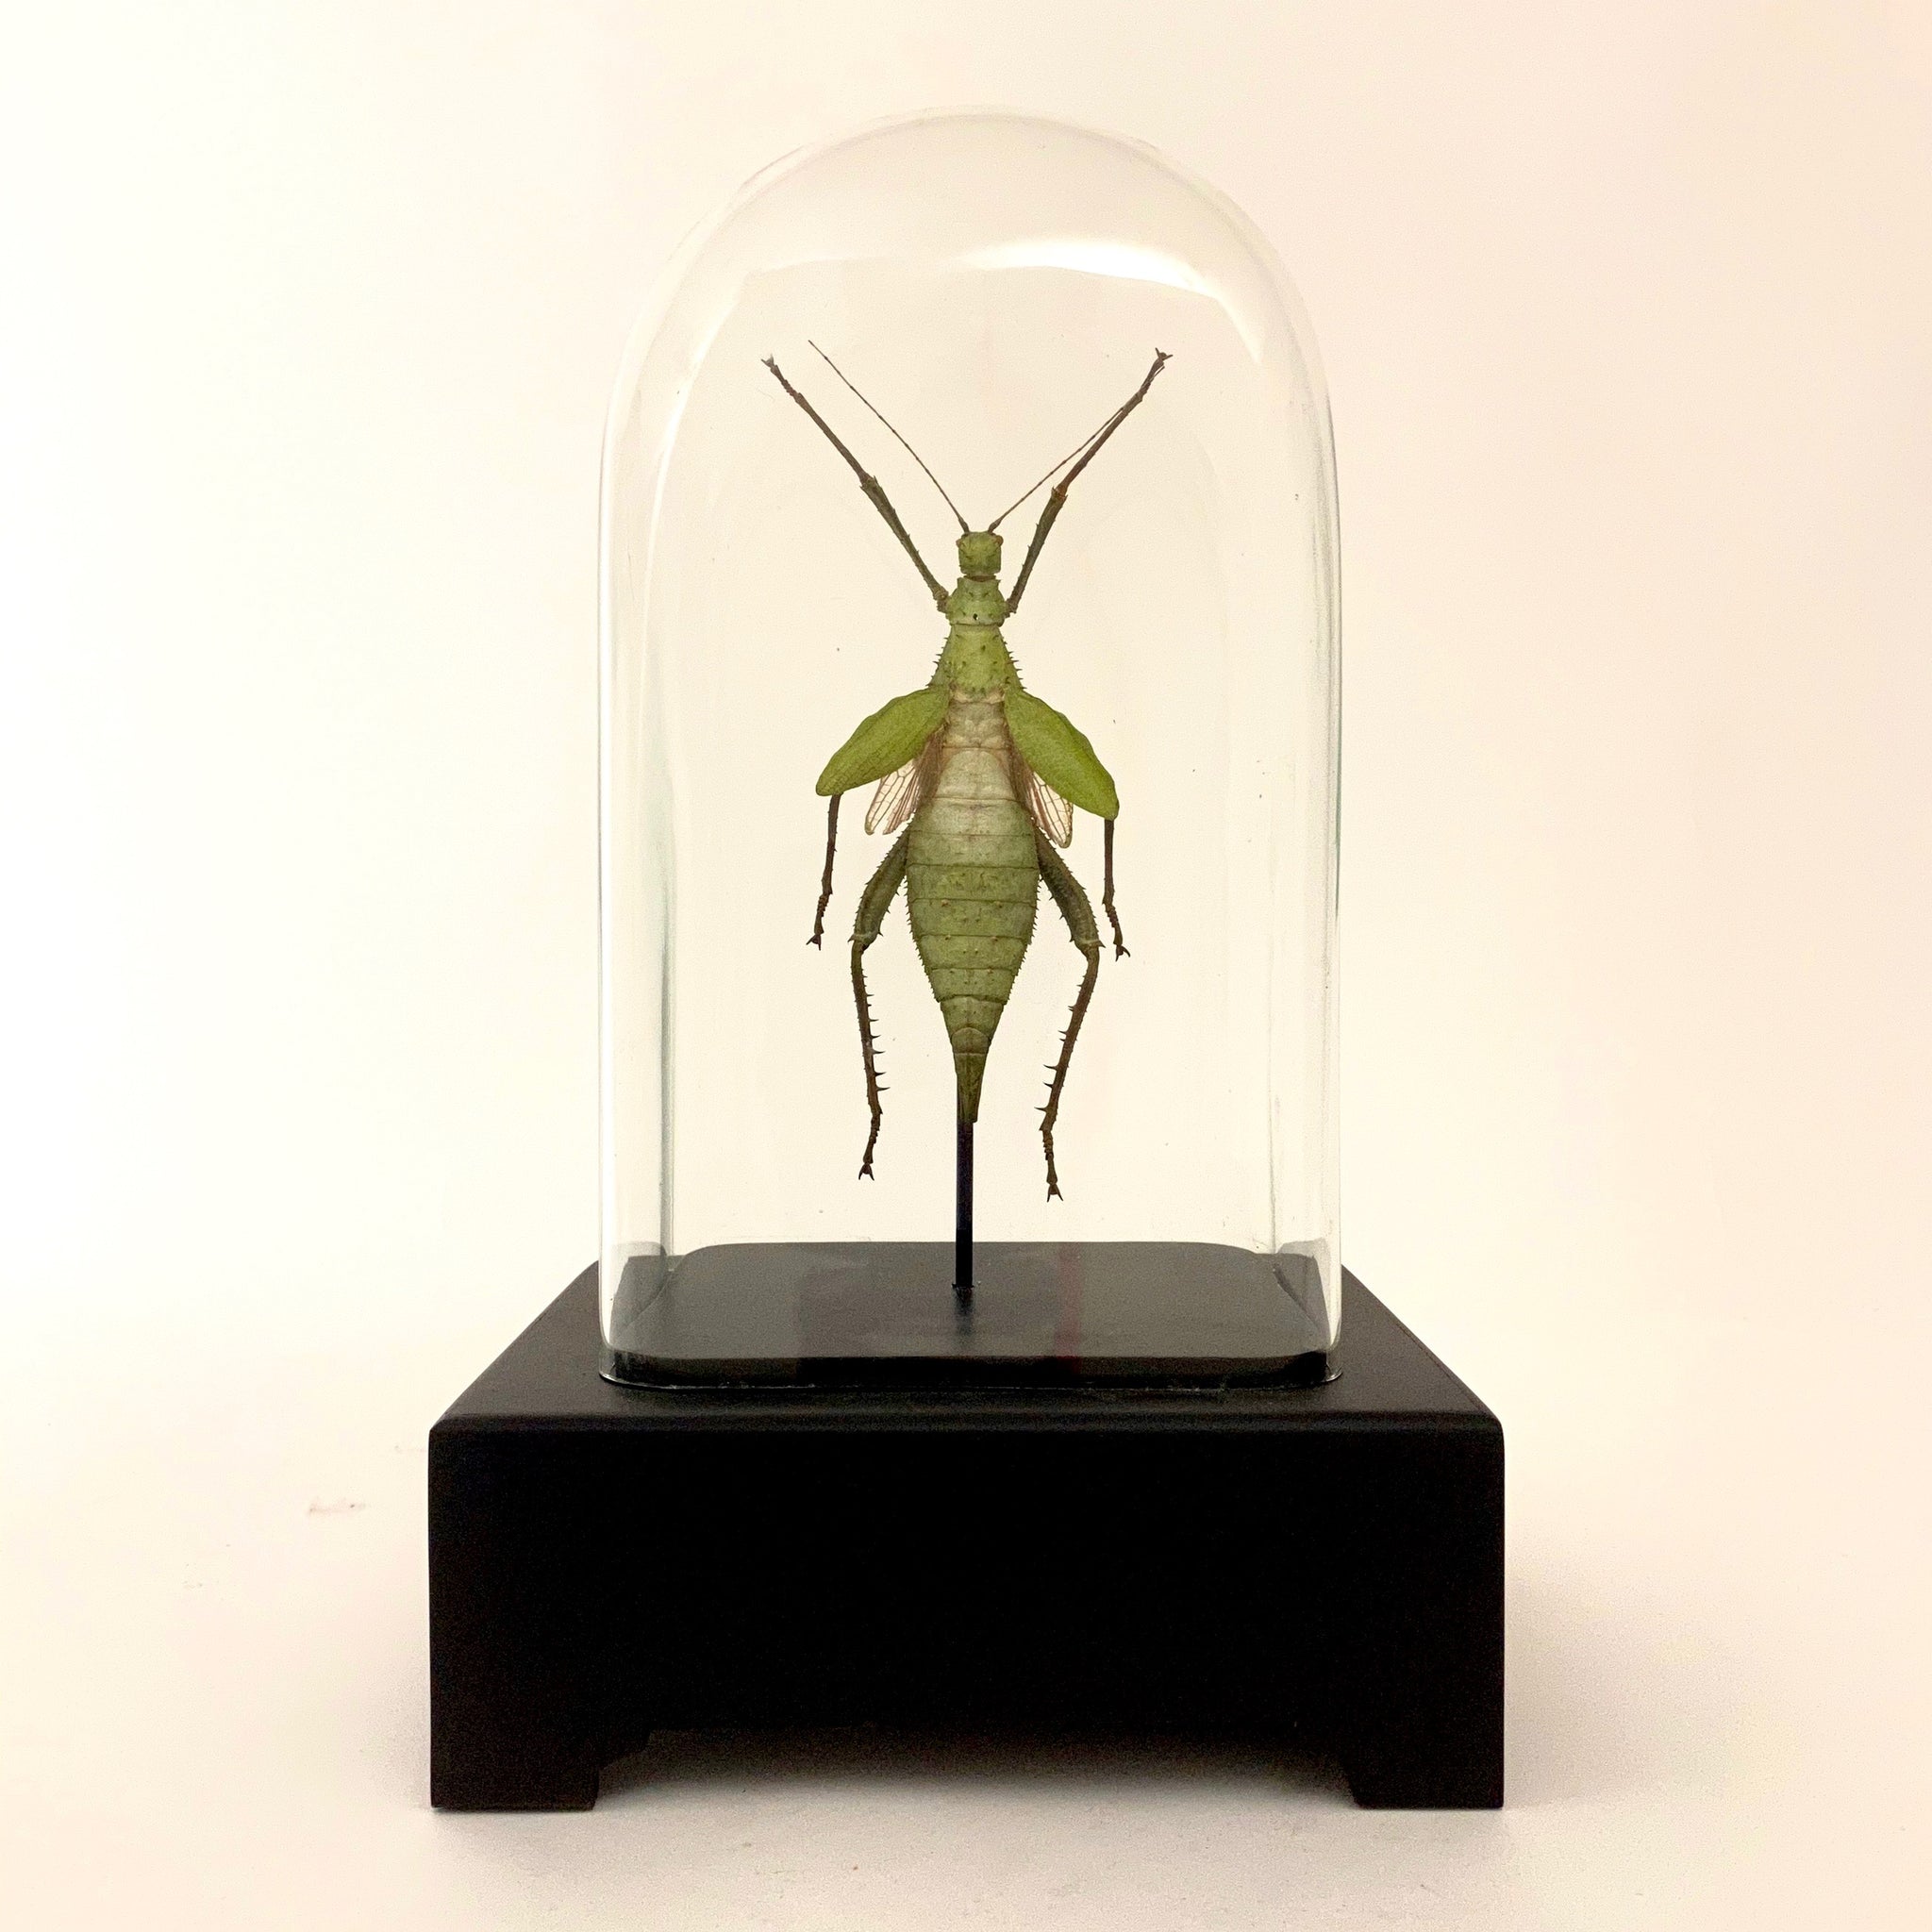 Giant jungle nymph in unusual antique glass display case.